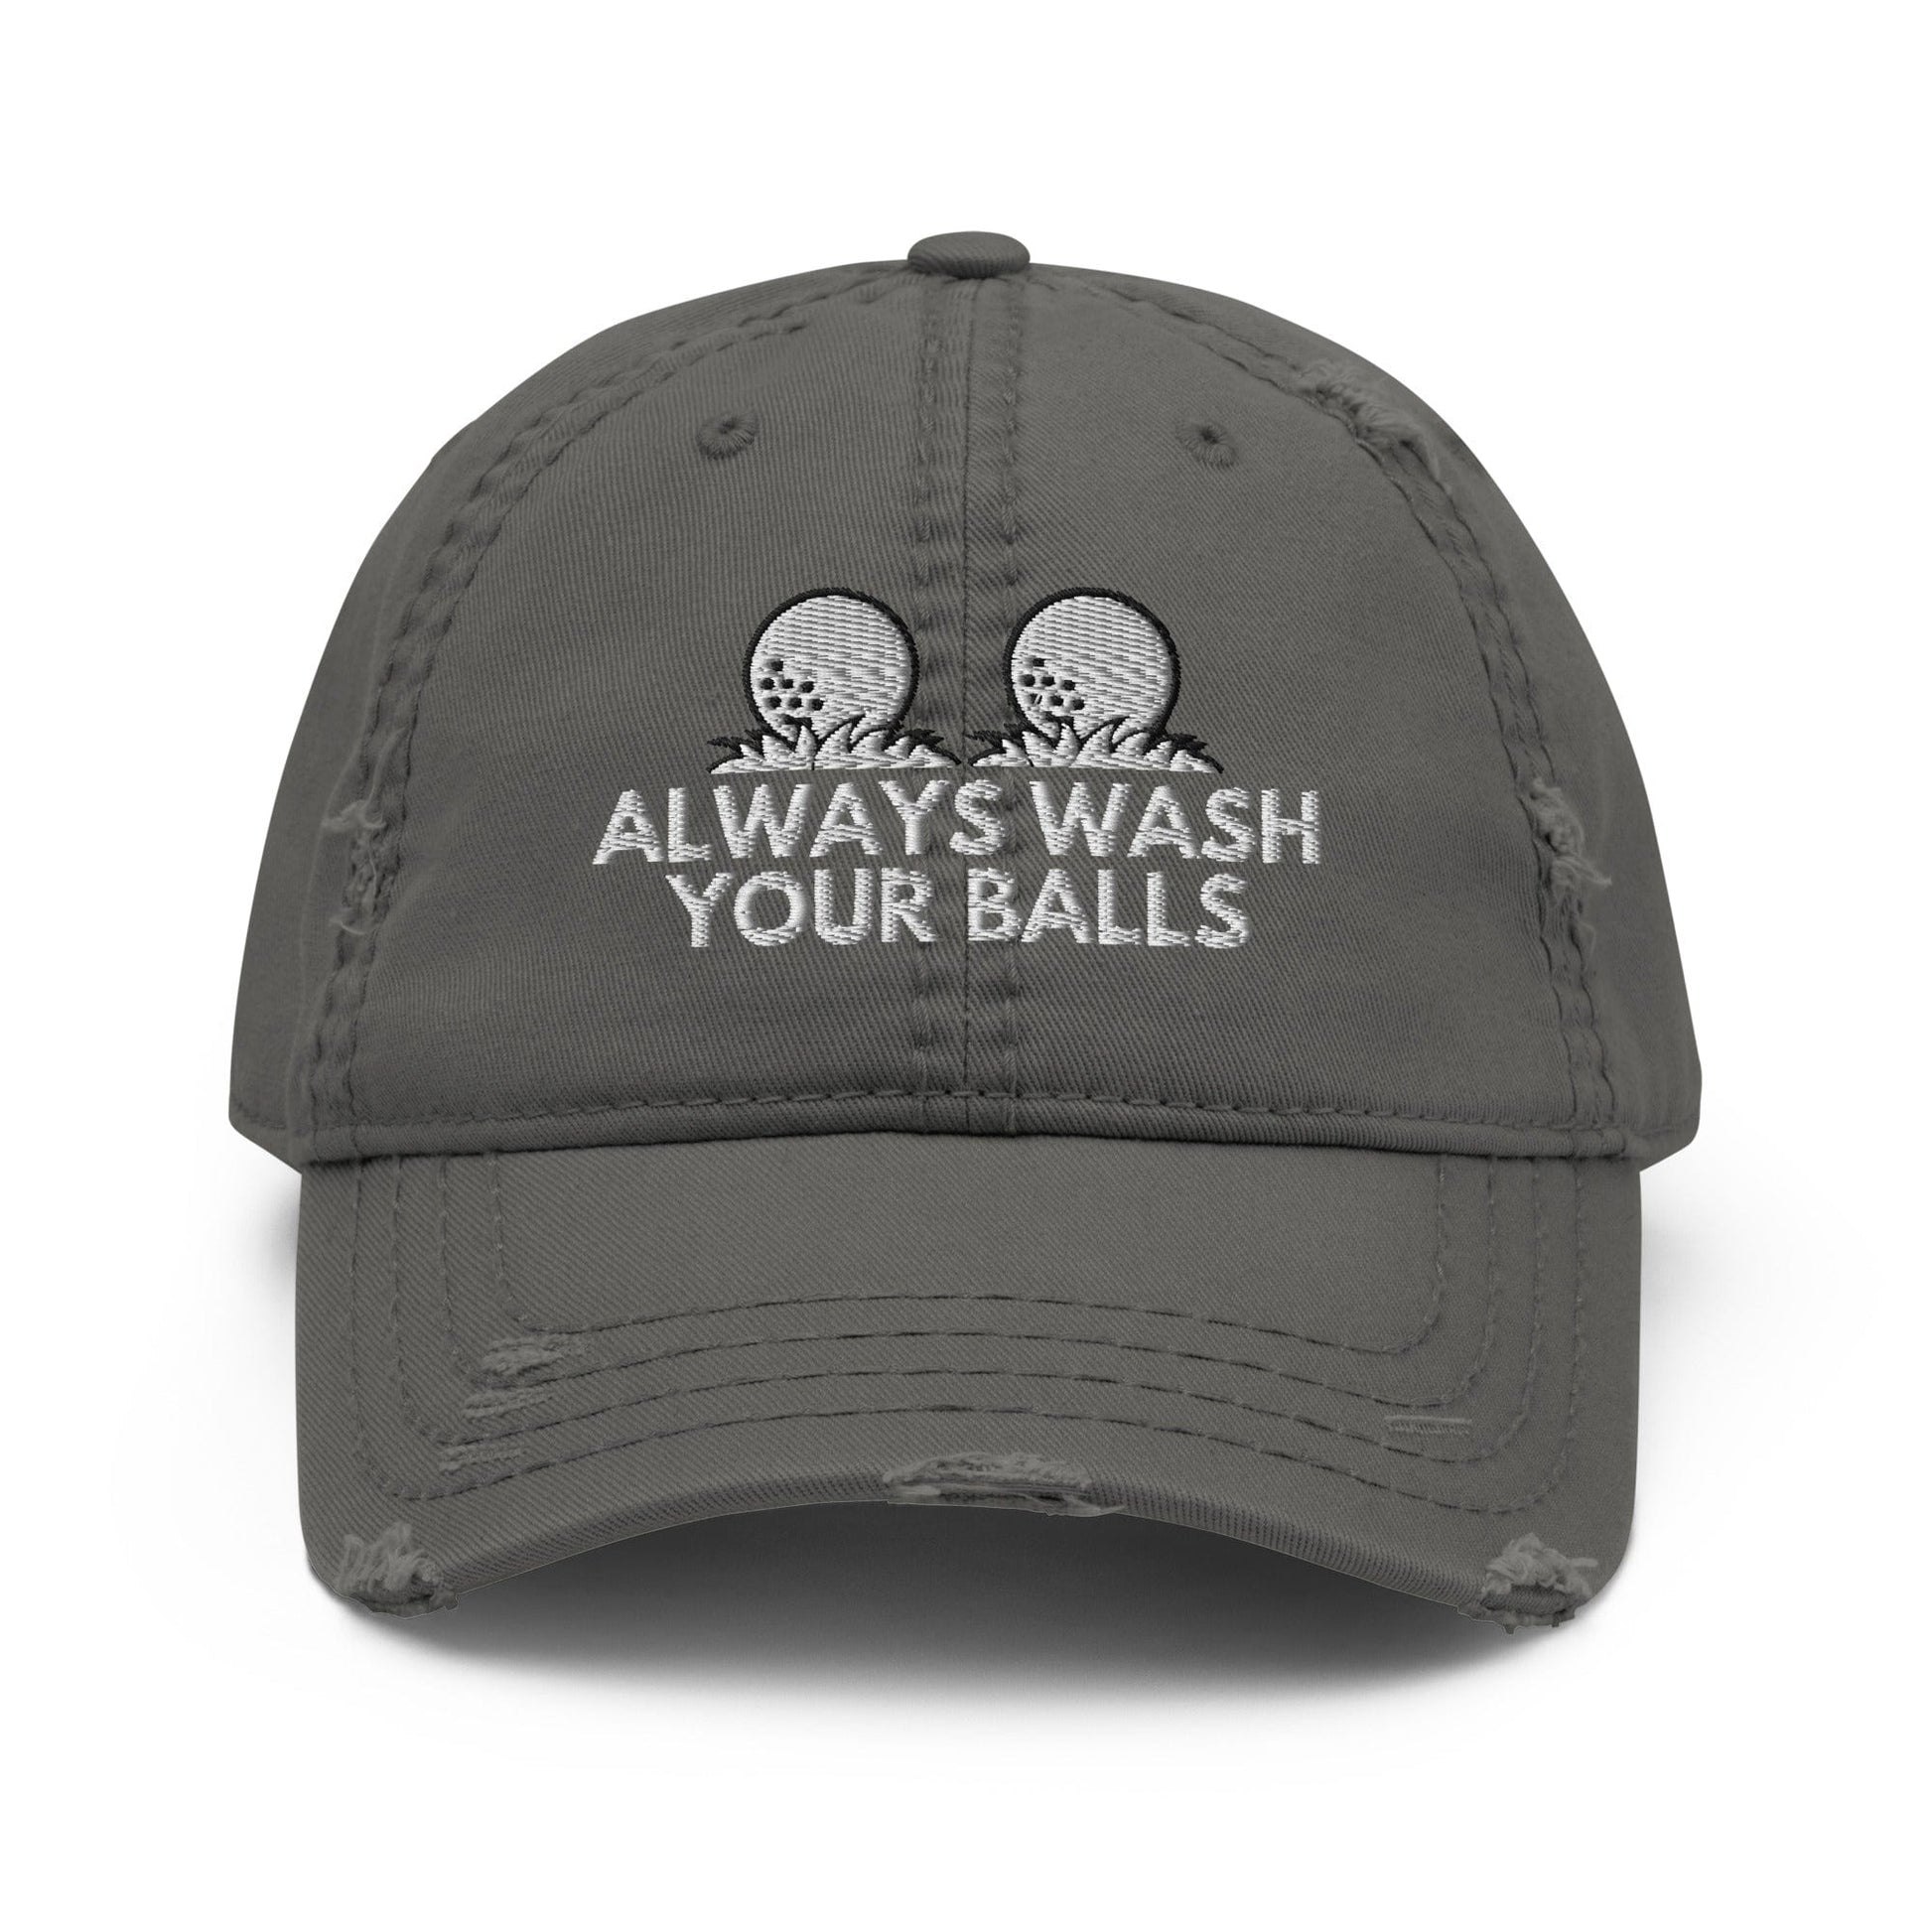 Funny Golfer Gifts  Distressed Cap Charcoal Grey Always Wash Your Balls Hat Distressed Hat